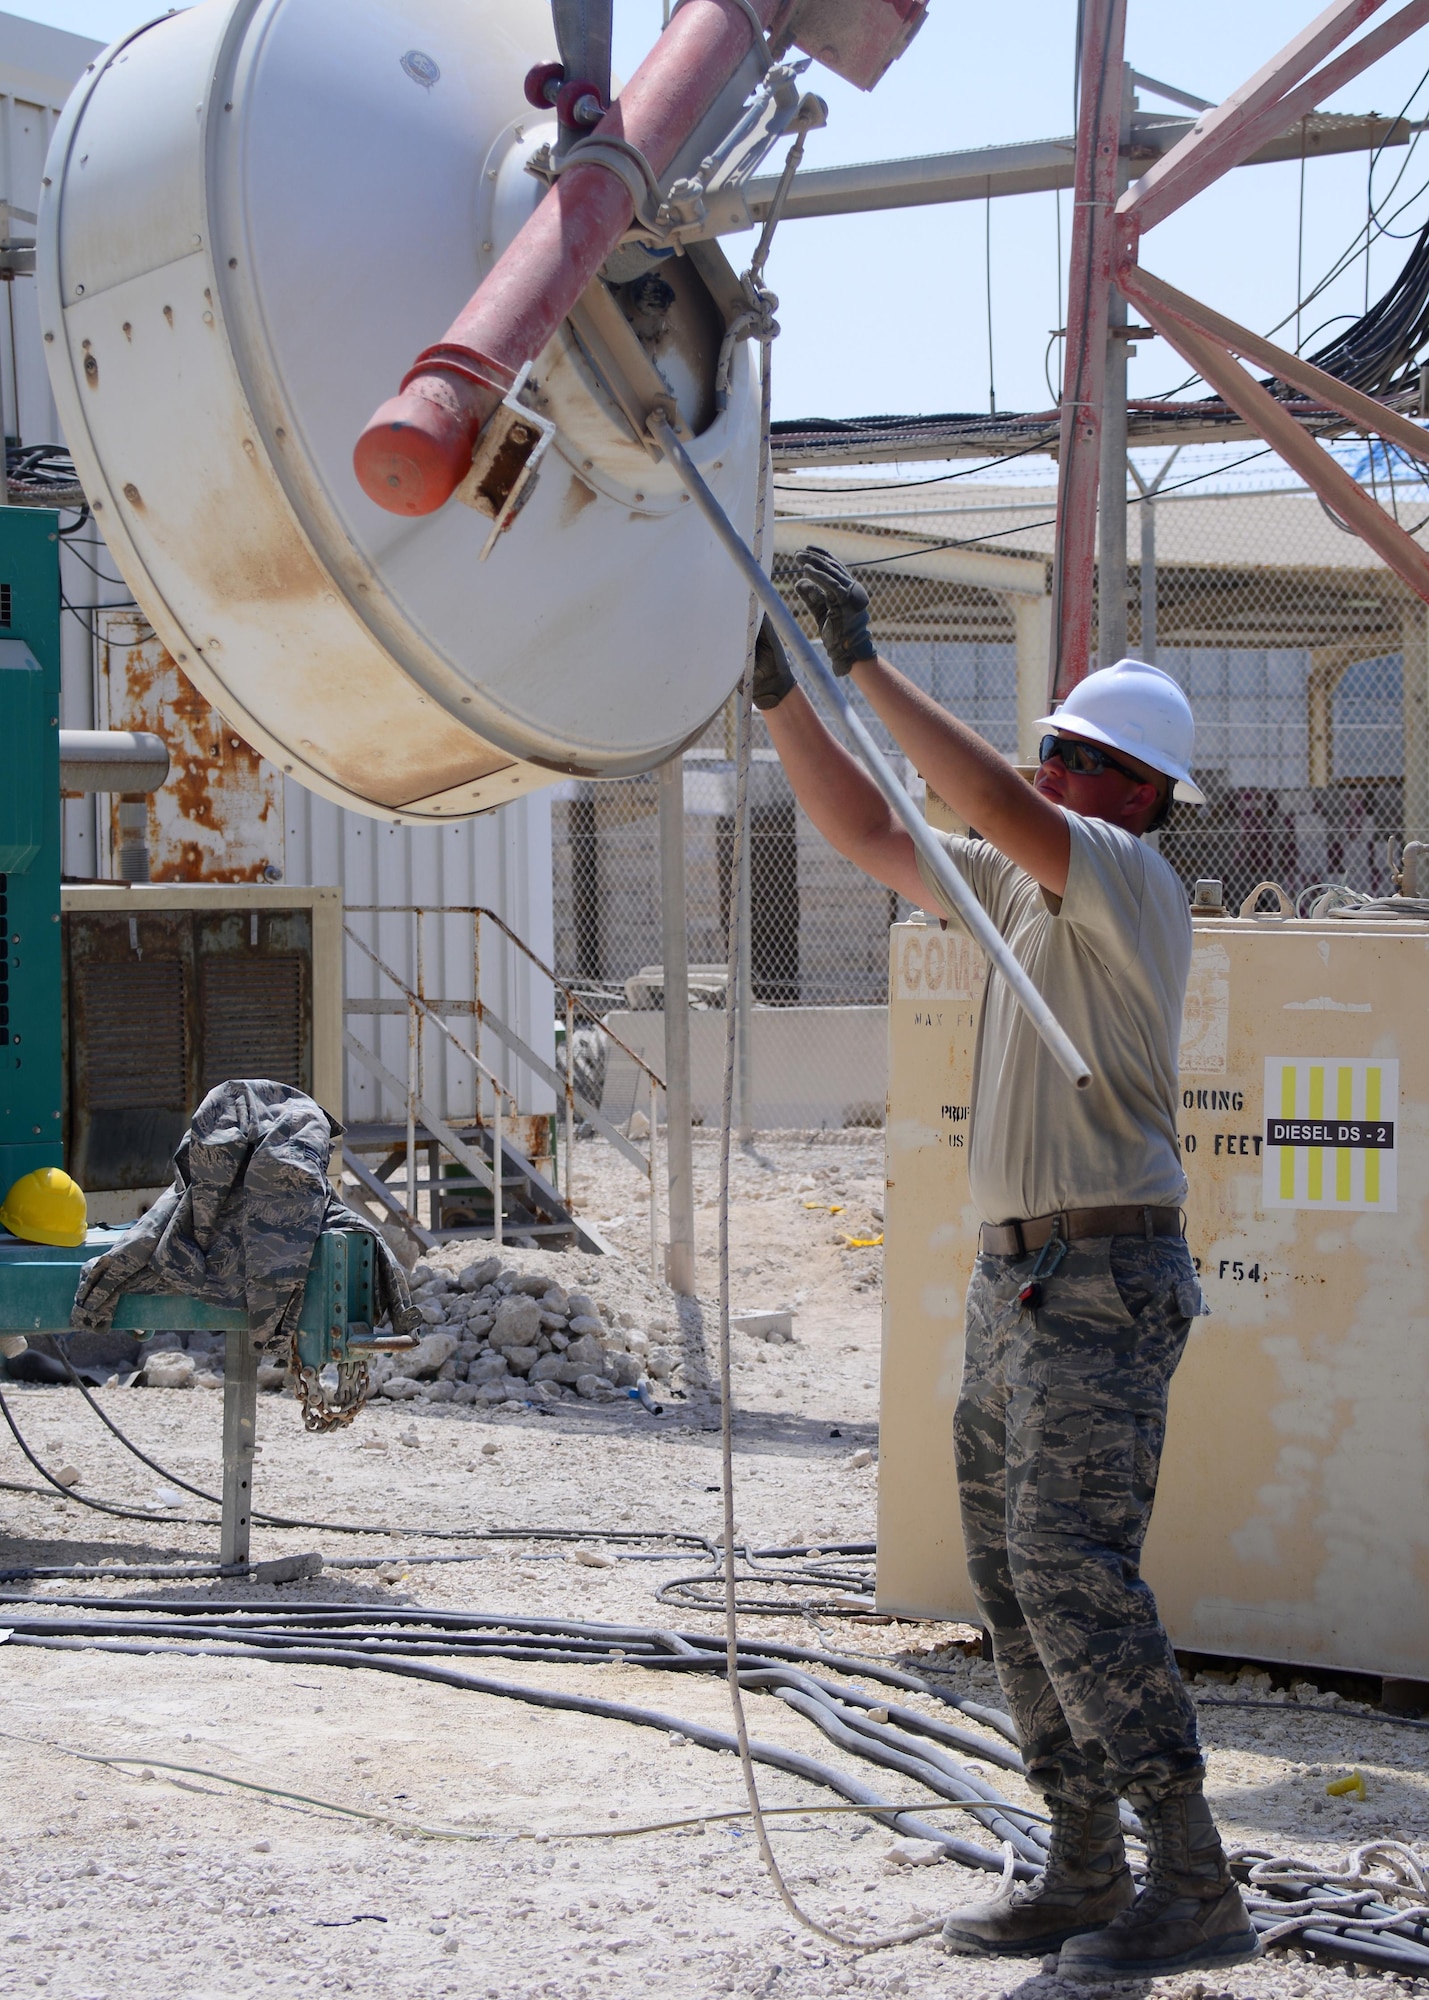 Airman 1st Class Ryan Batt, 379th Expeditionary Civil Engineering Squadron Pavement and Heavy Equipment specialist, guides a microwave transmitter down to the ground after it was removed from a radio tower Oct. 8, 2016, at Al Udeid Air Base, Qatar. The transmitter, along with the metal bar it was mounted on, weighed over 200 pounds and required the use of a Terex RT-780 crane to be removed safely. (U.S. Air Force Photo/Senior Airman Miles Wilson/Released)